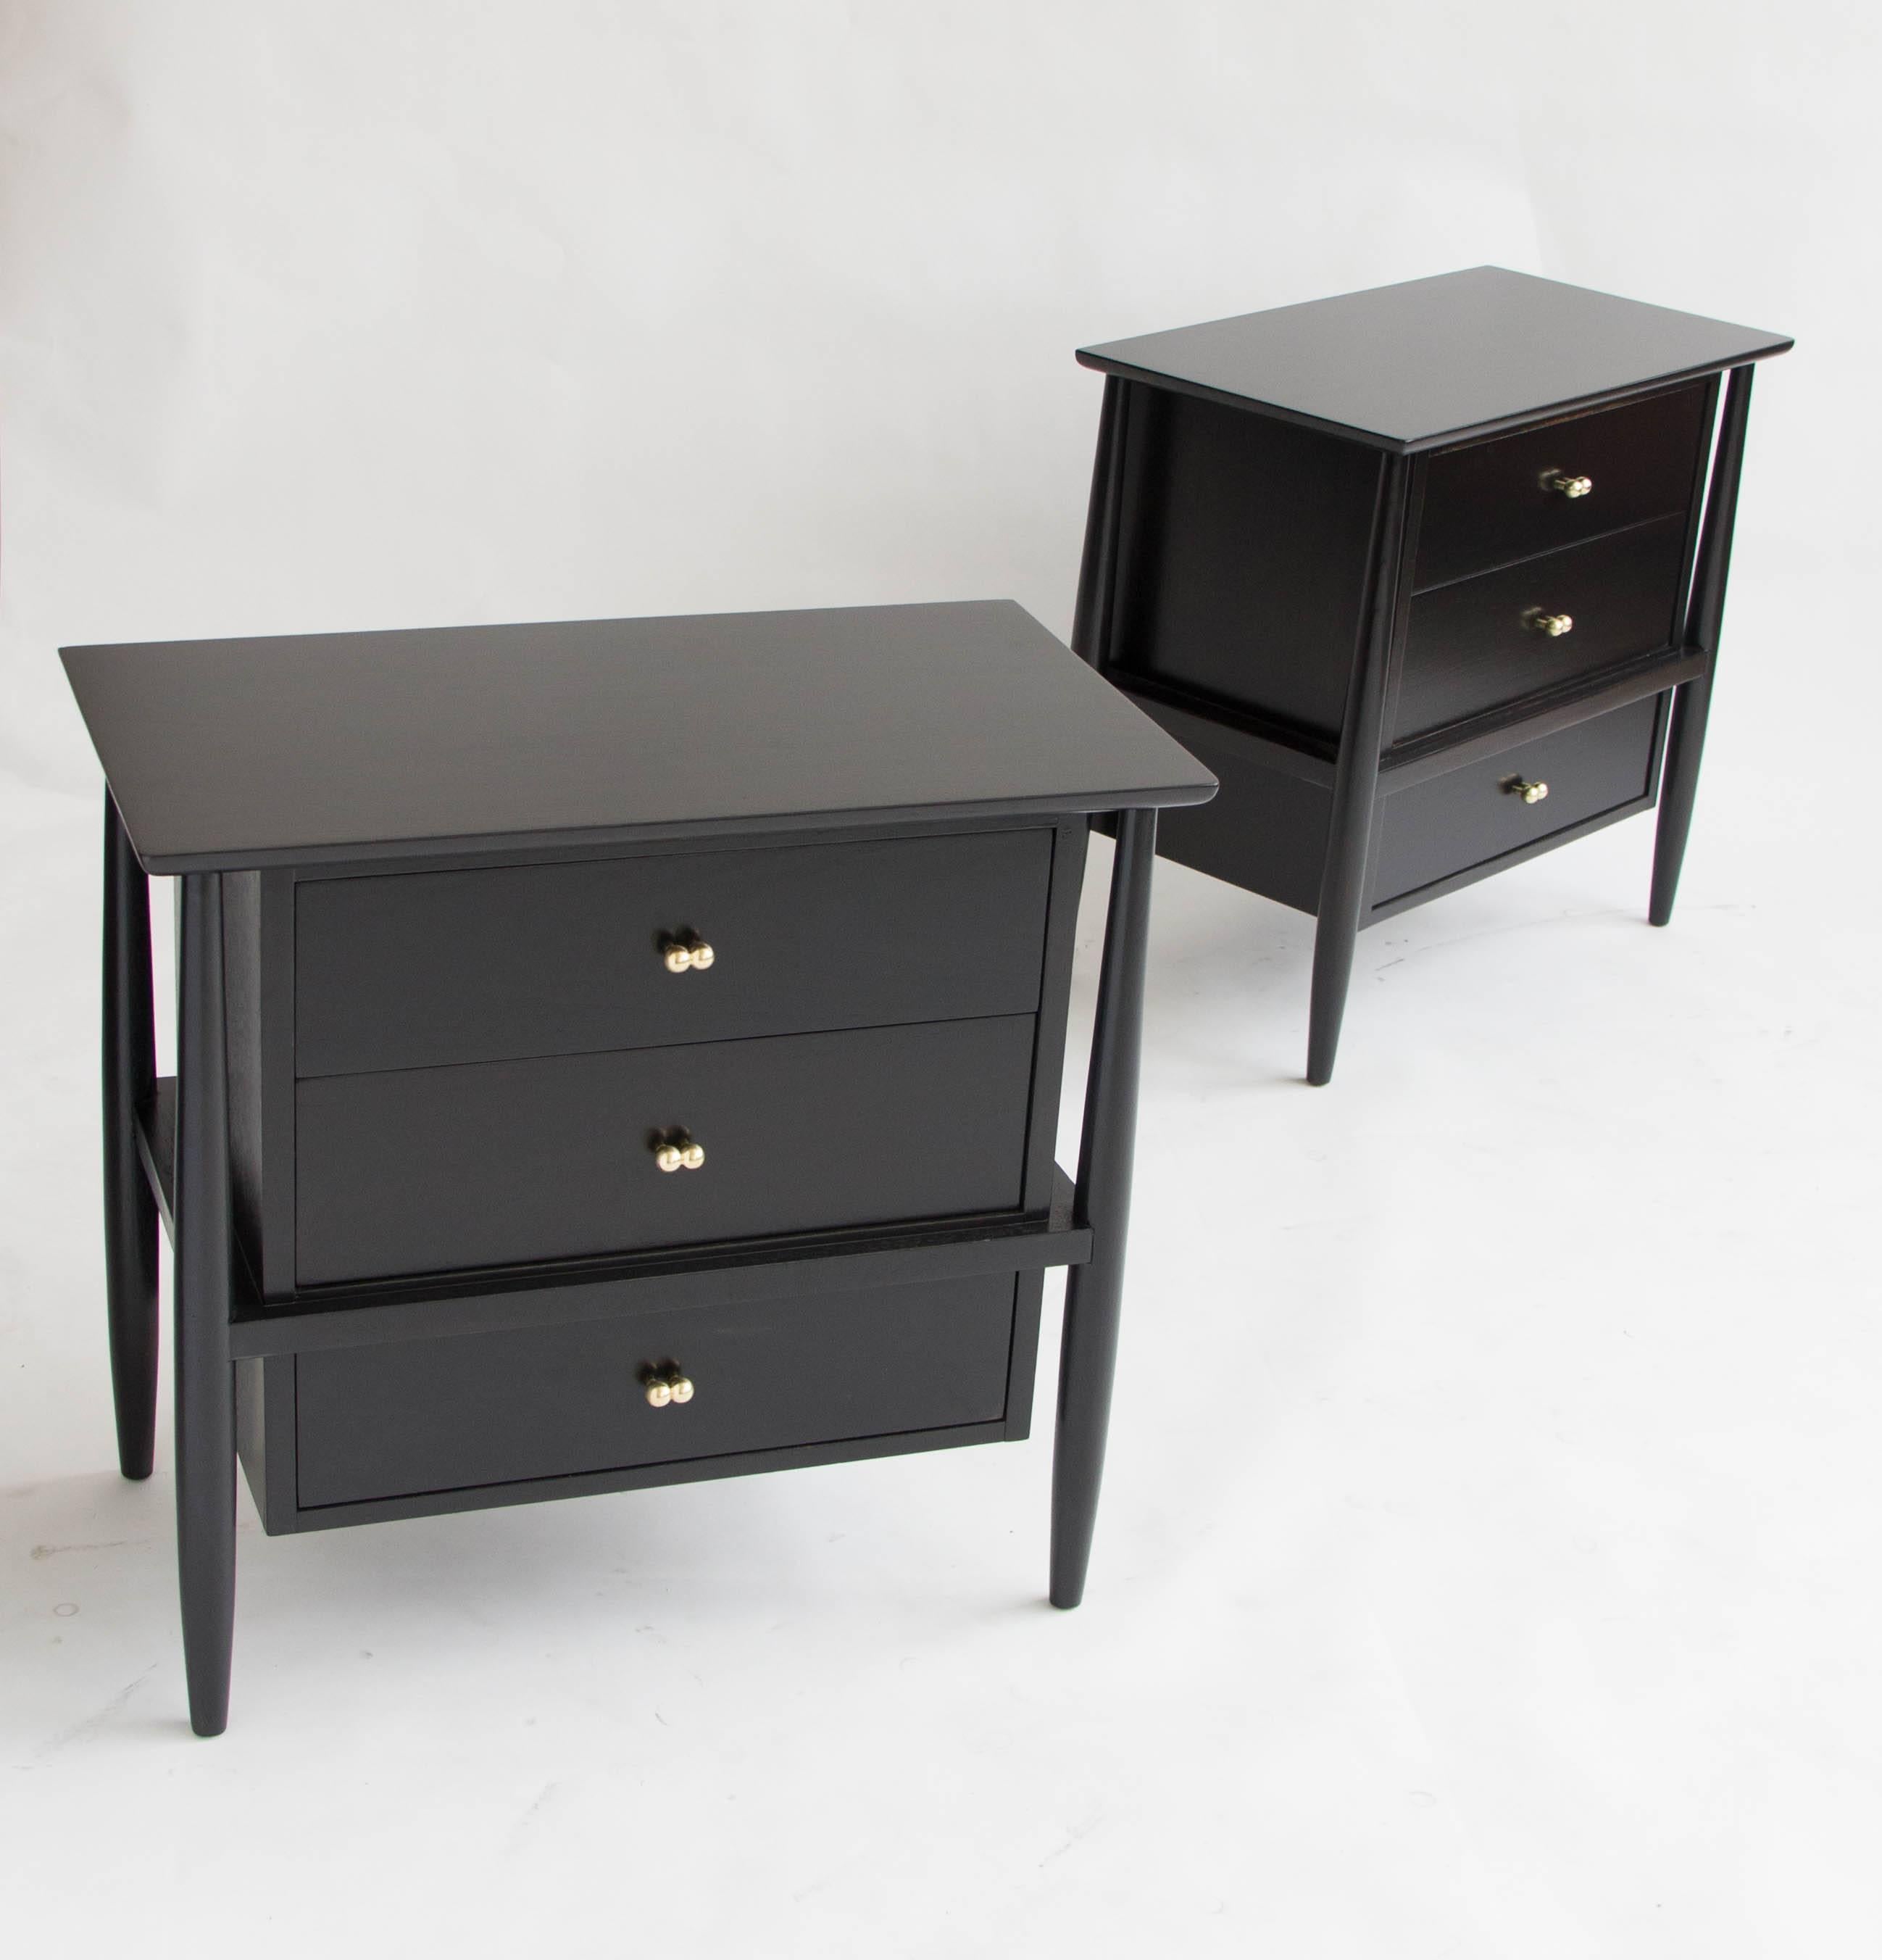 A pair of elegantly designed nightstands sold by John Stuart and manufactured by Mt. Airy. Each piece has four exposed legs that suspend a floating three-drawer stack in ebonized walnut, with rich wood grain on full display. Each drawer opens with a